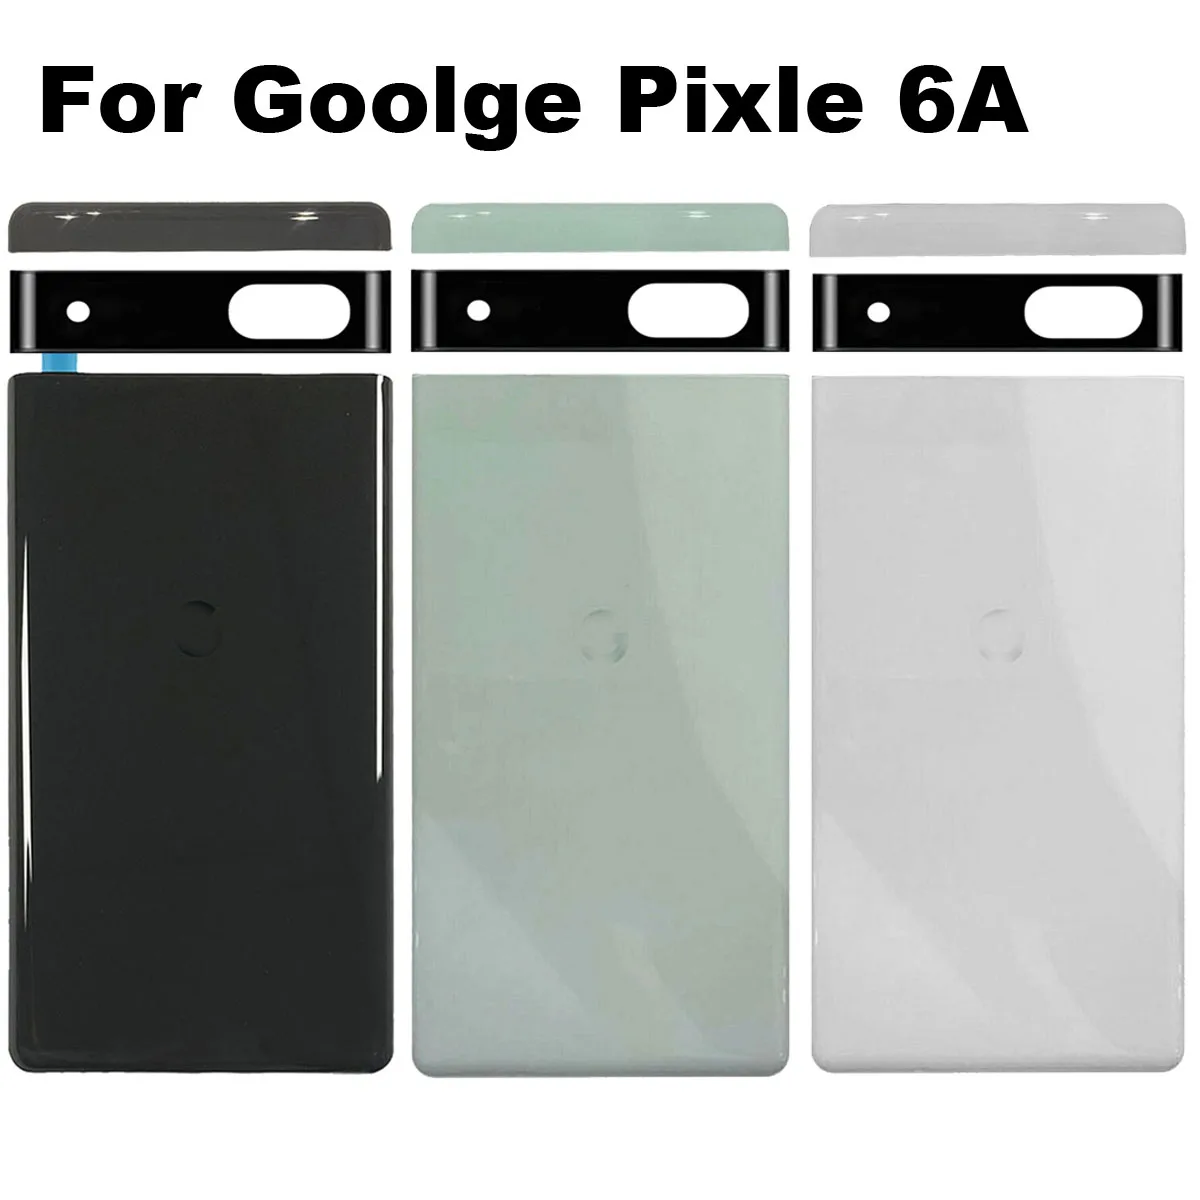 

For Google Pixel 6A Pixel6A Back Glass Housing Rear Case Battery Cover Glass Lens Lid Replacement